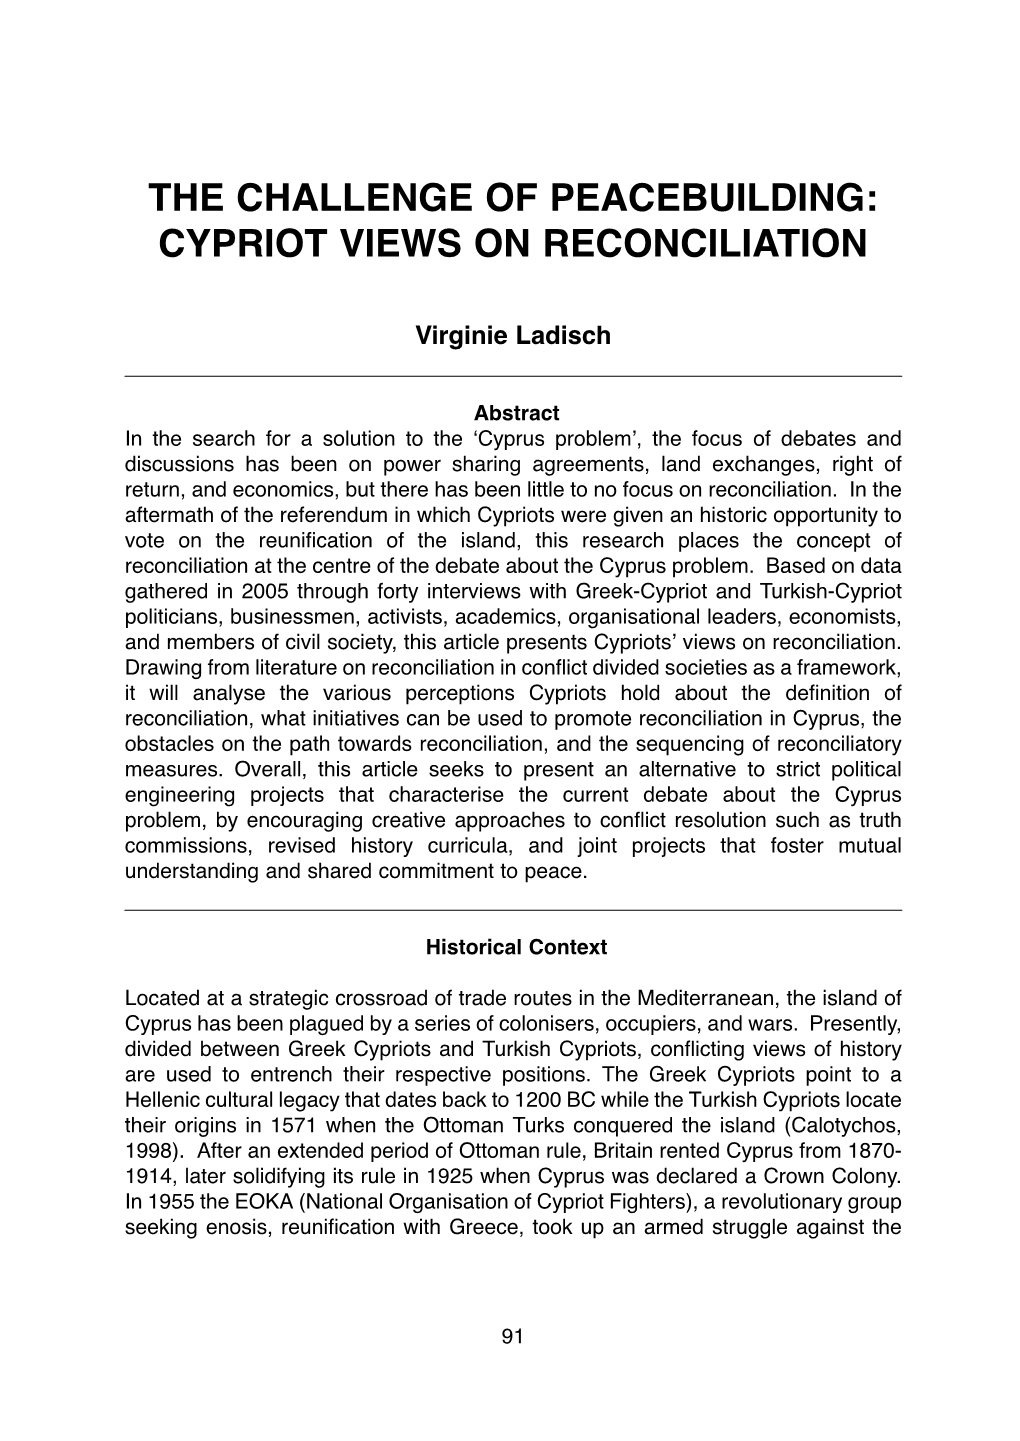 The Challenge of Peacebuilding: Cypriot Views on Reconciliation